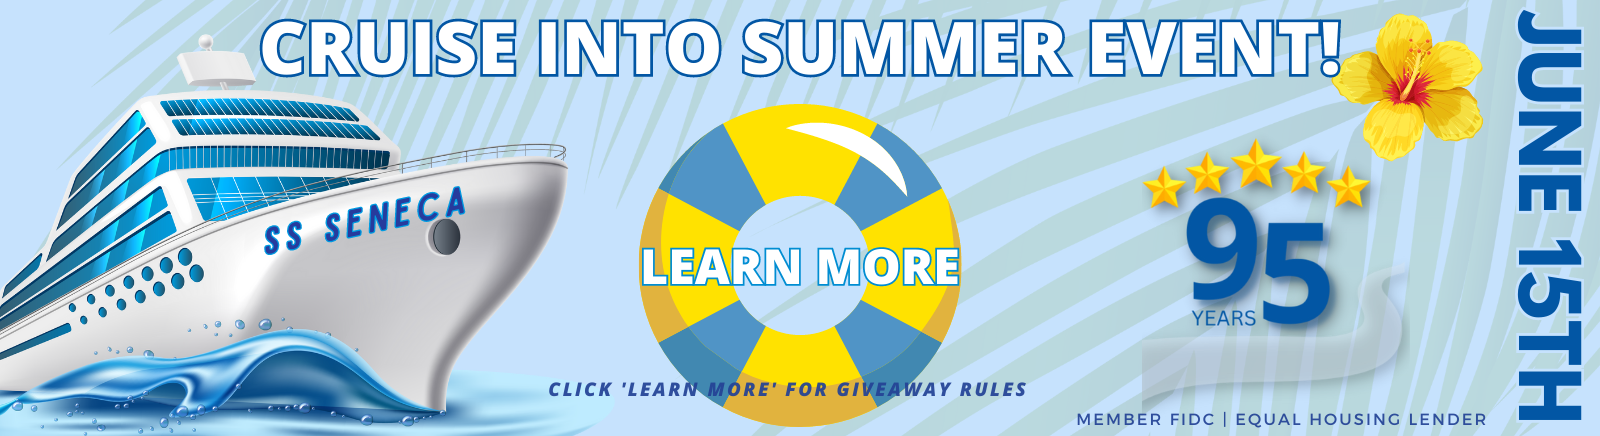 cruise into summer event seneca savings cruise giveaway june 15th all branches